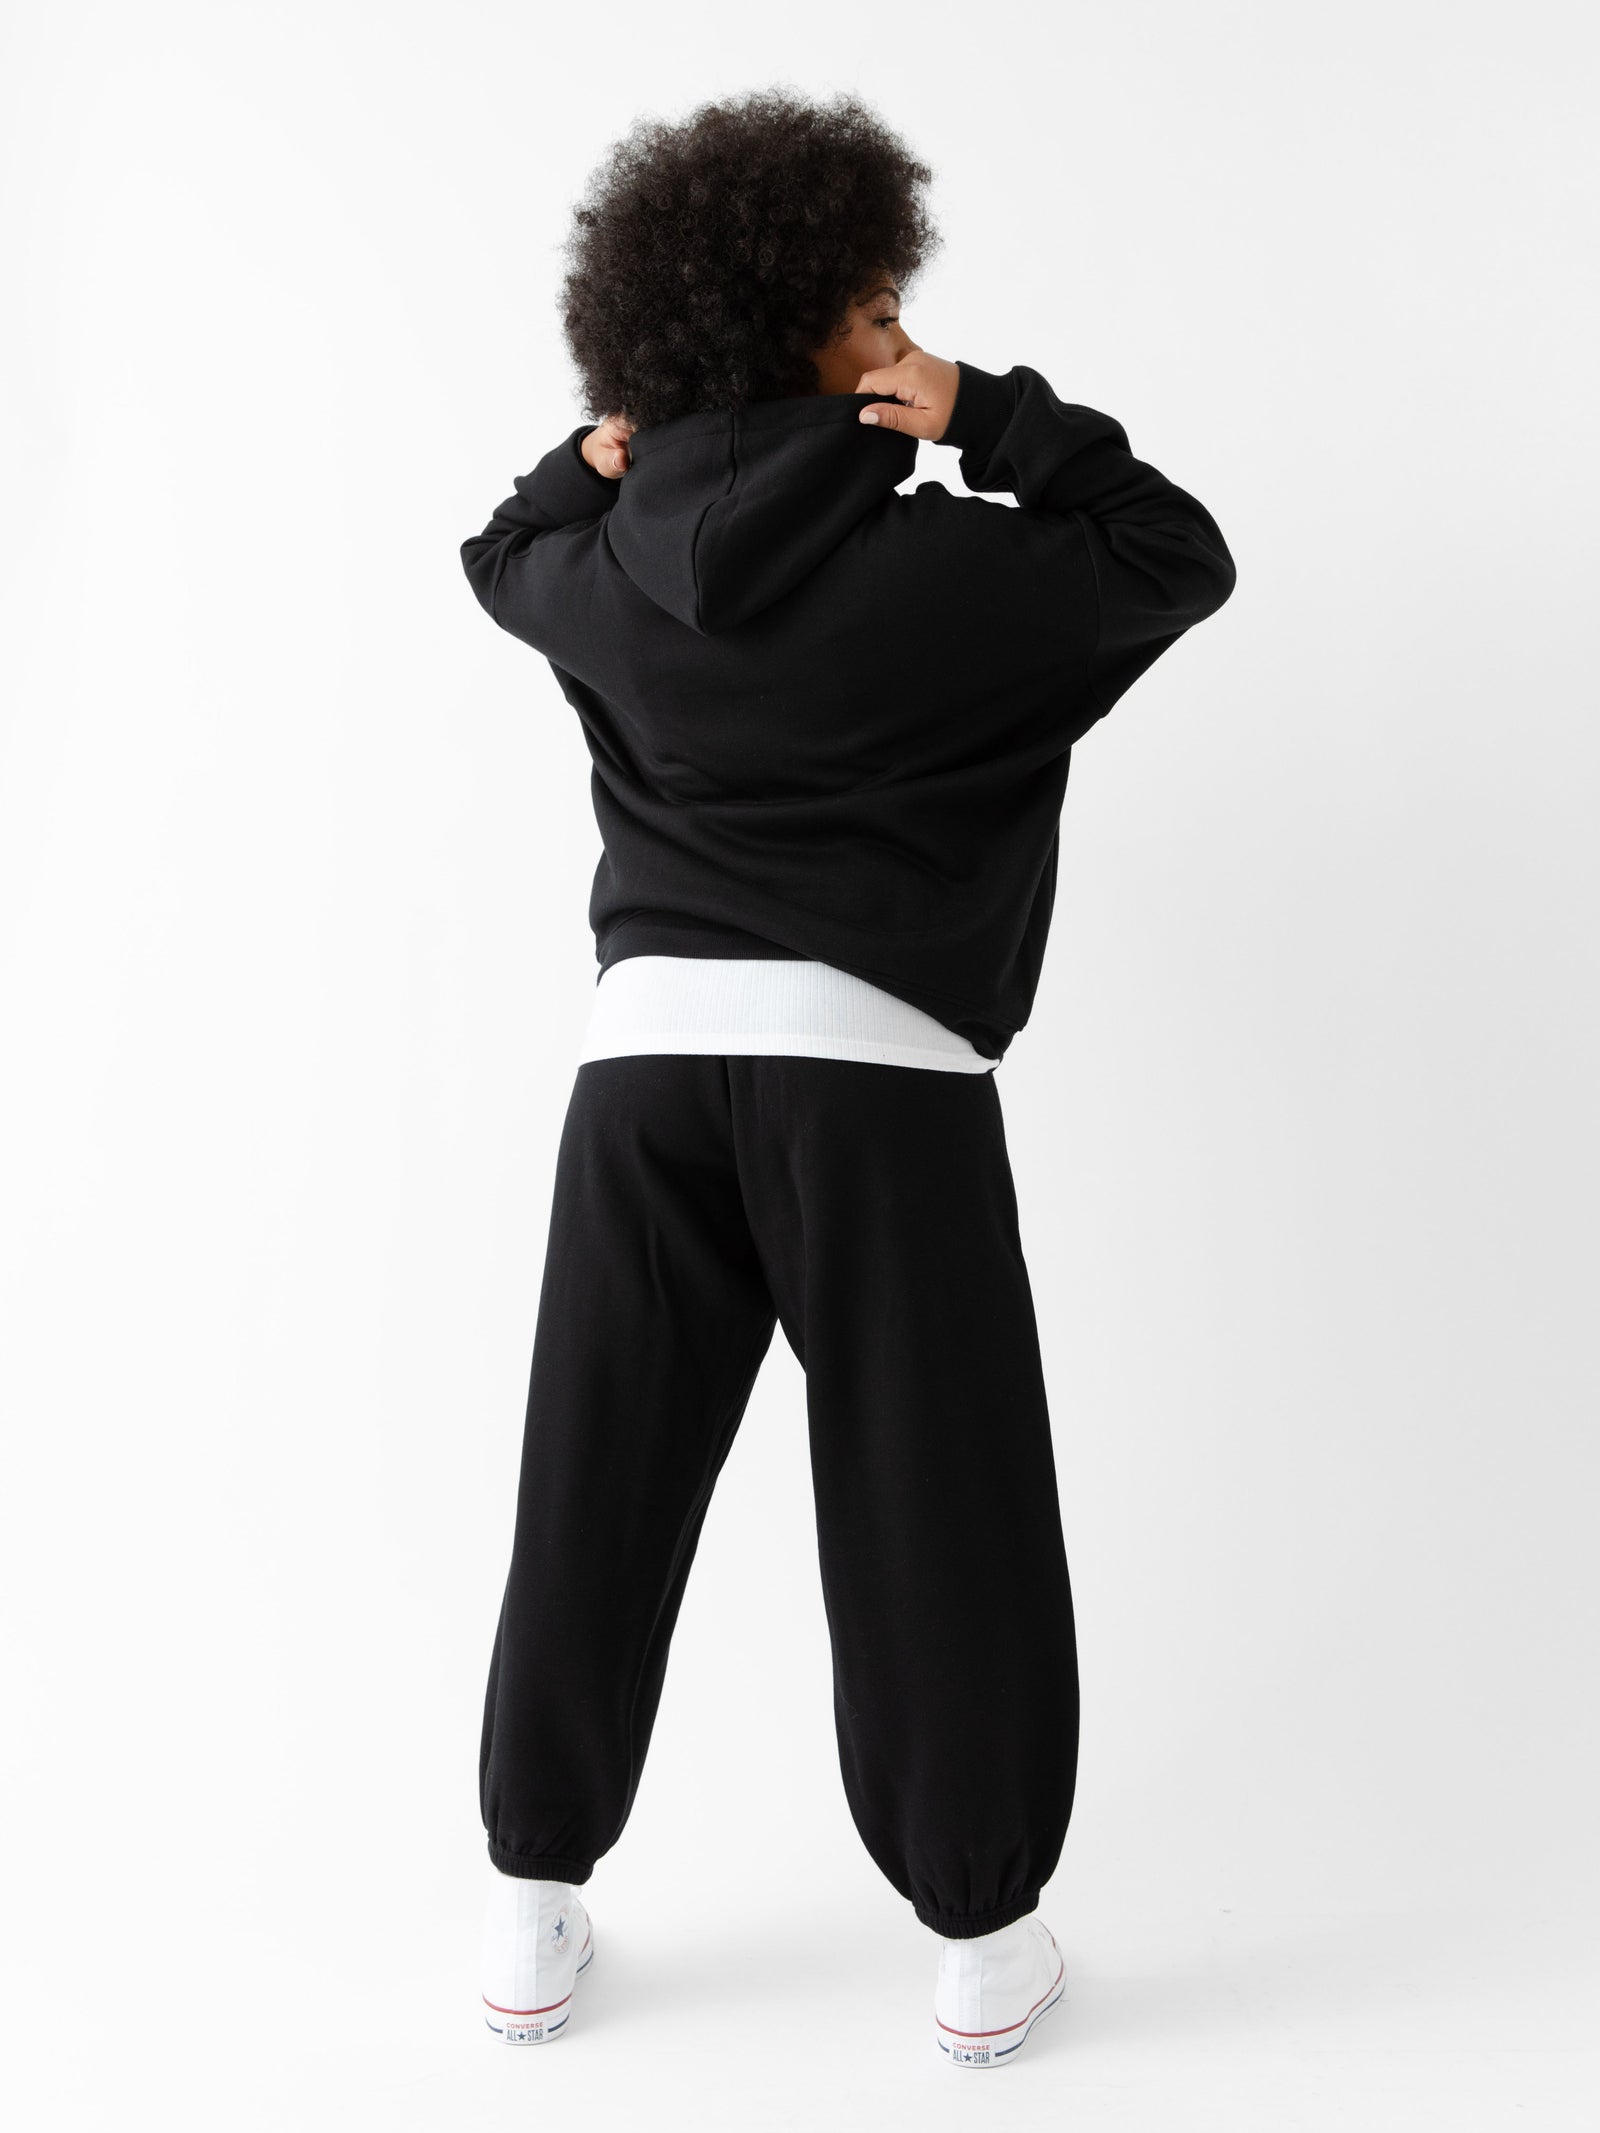 Black CityScape Joggers. The Joggers are being worn by a female model. The photo is taken from the waist down with the models hand by the pocket of the joggers. The back ground is a crisp white background. 